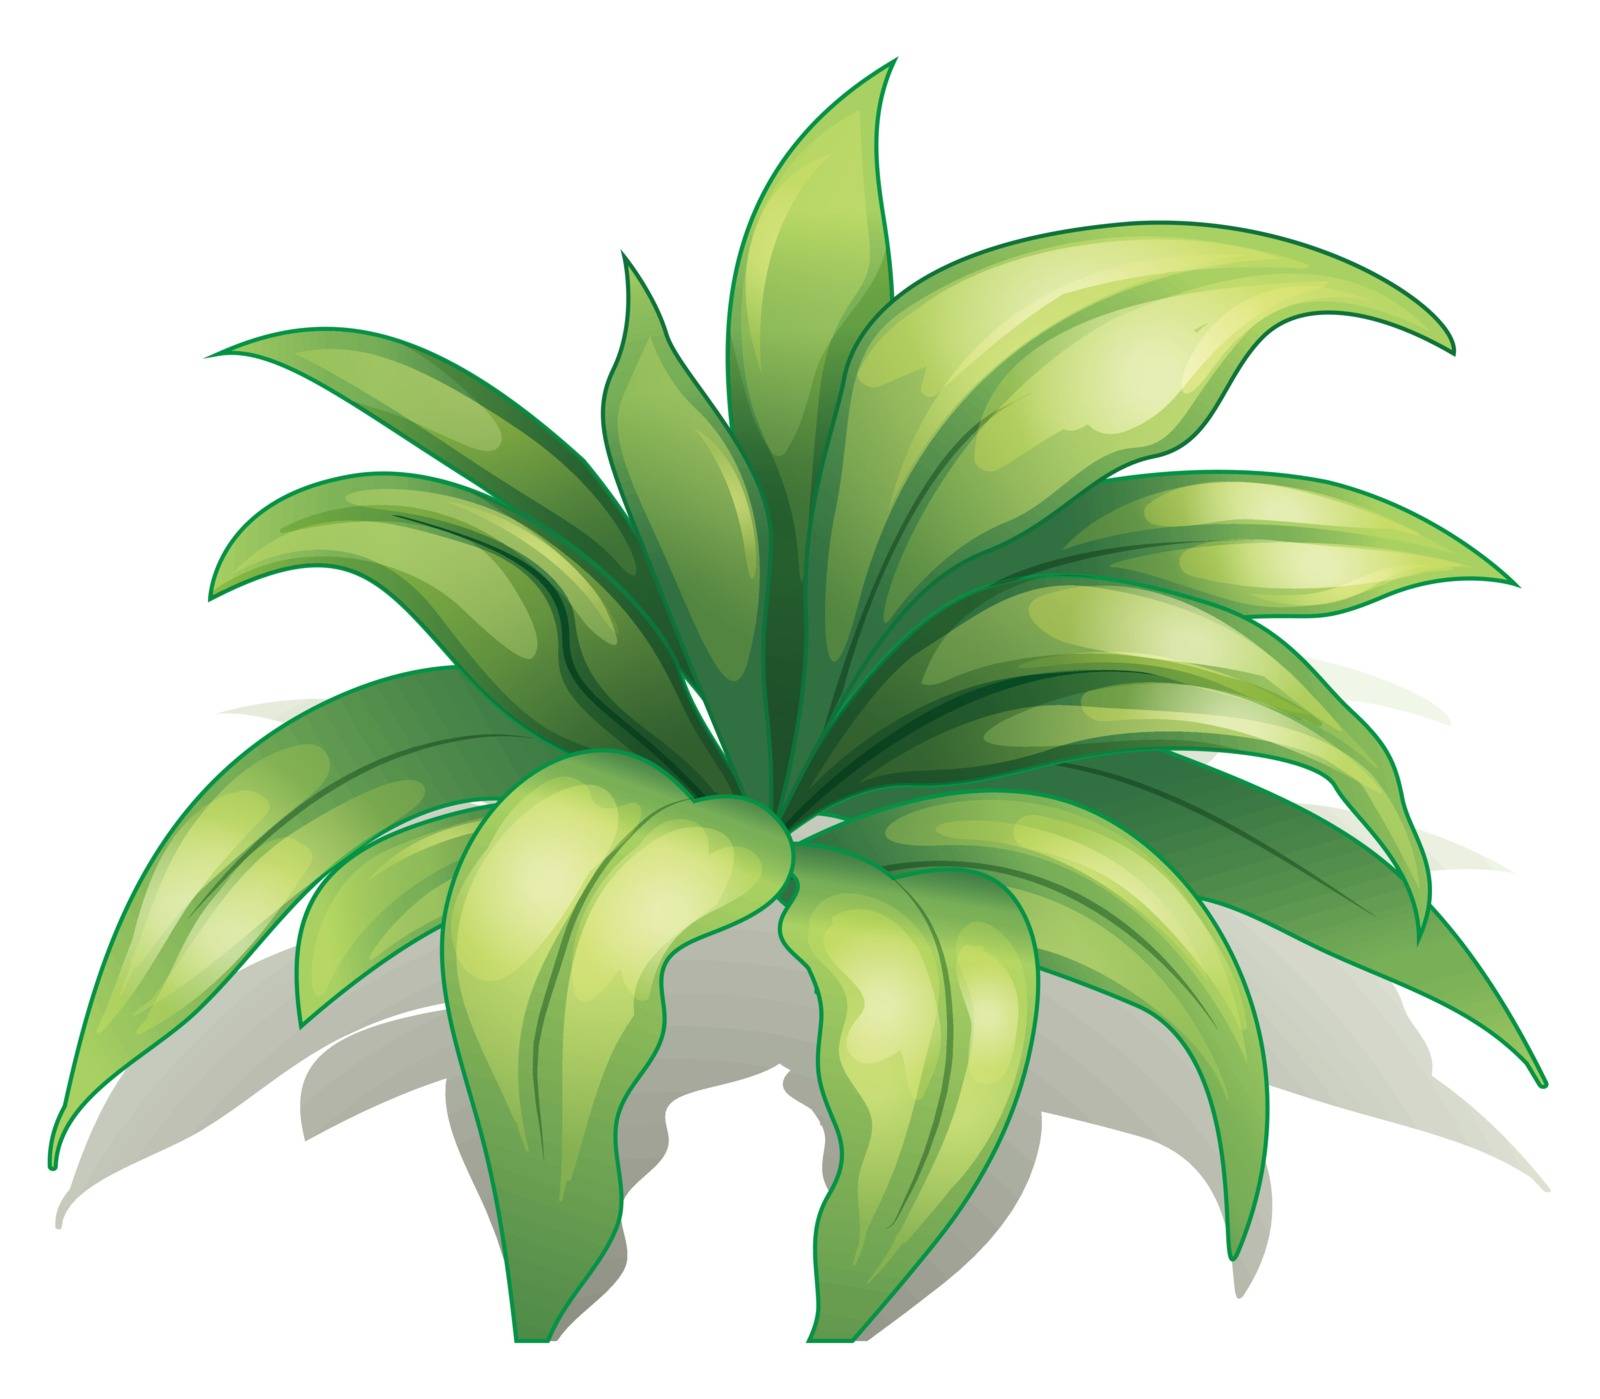 Illustration of a plant on a white background